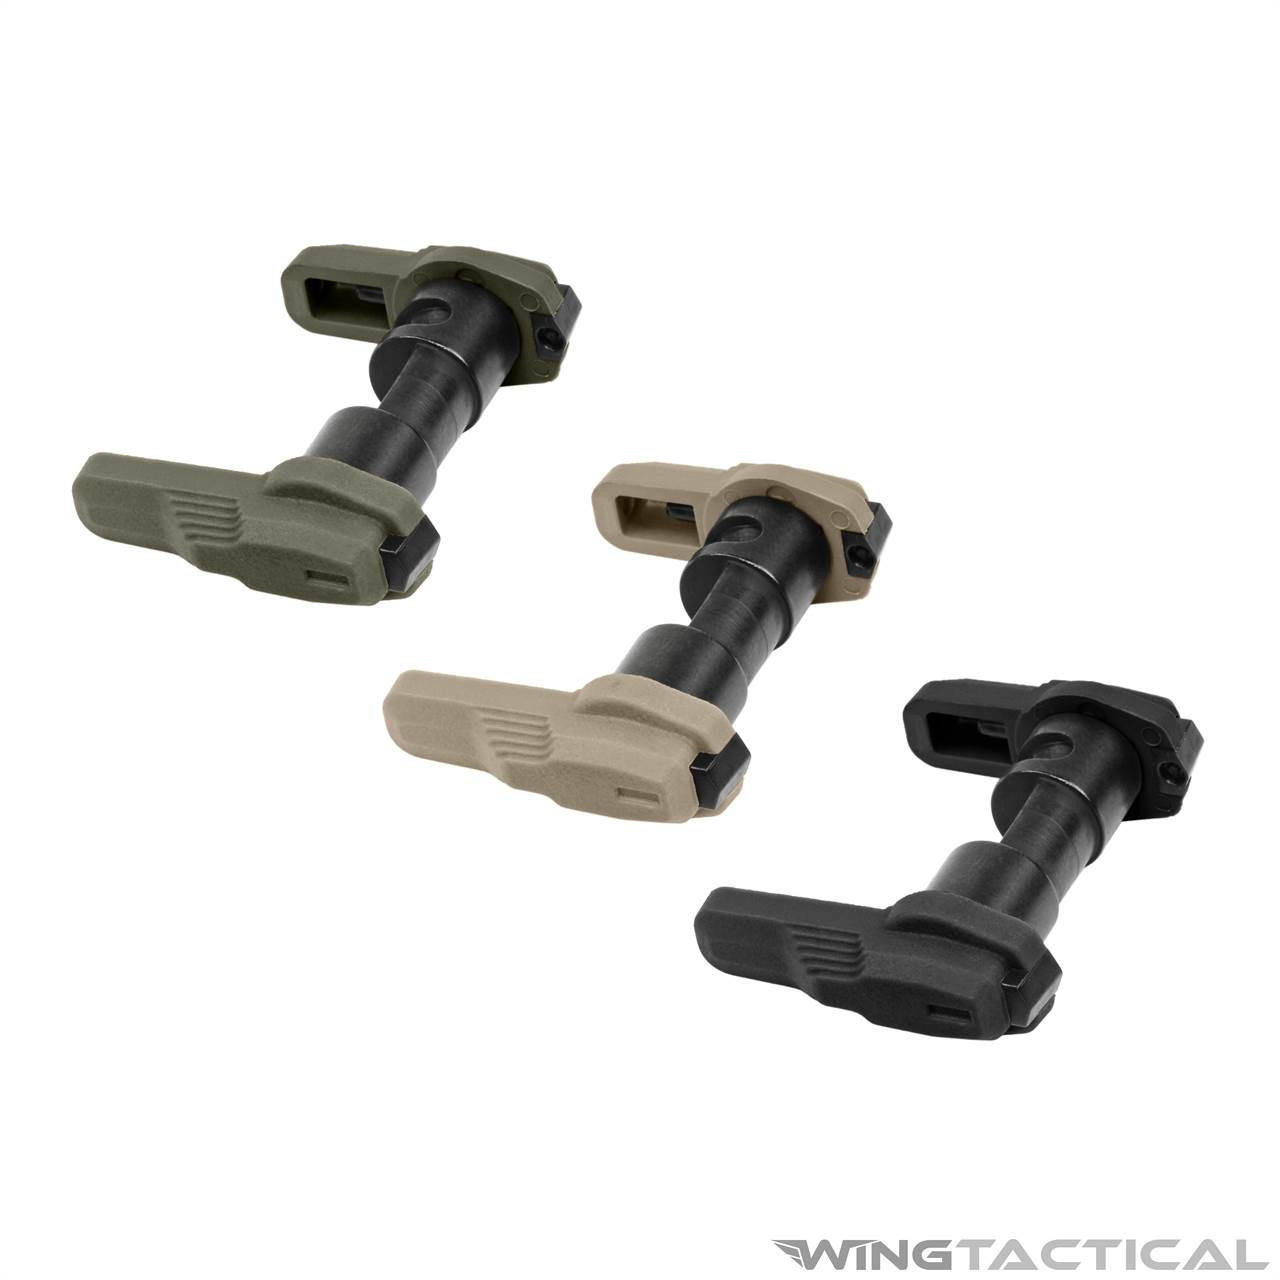  Magpul ESK Ambidextrous Safety Selector 